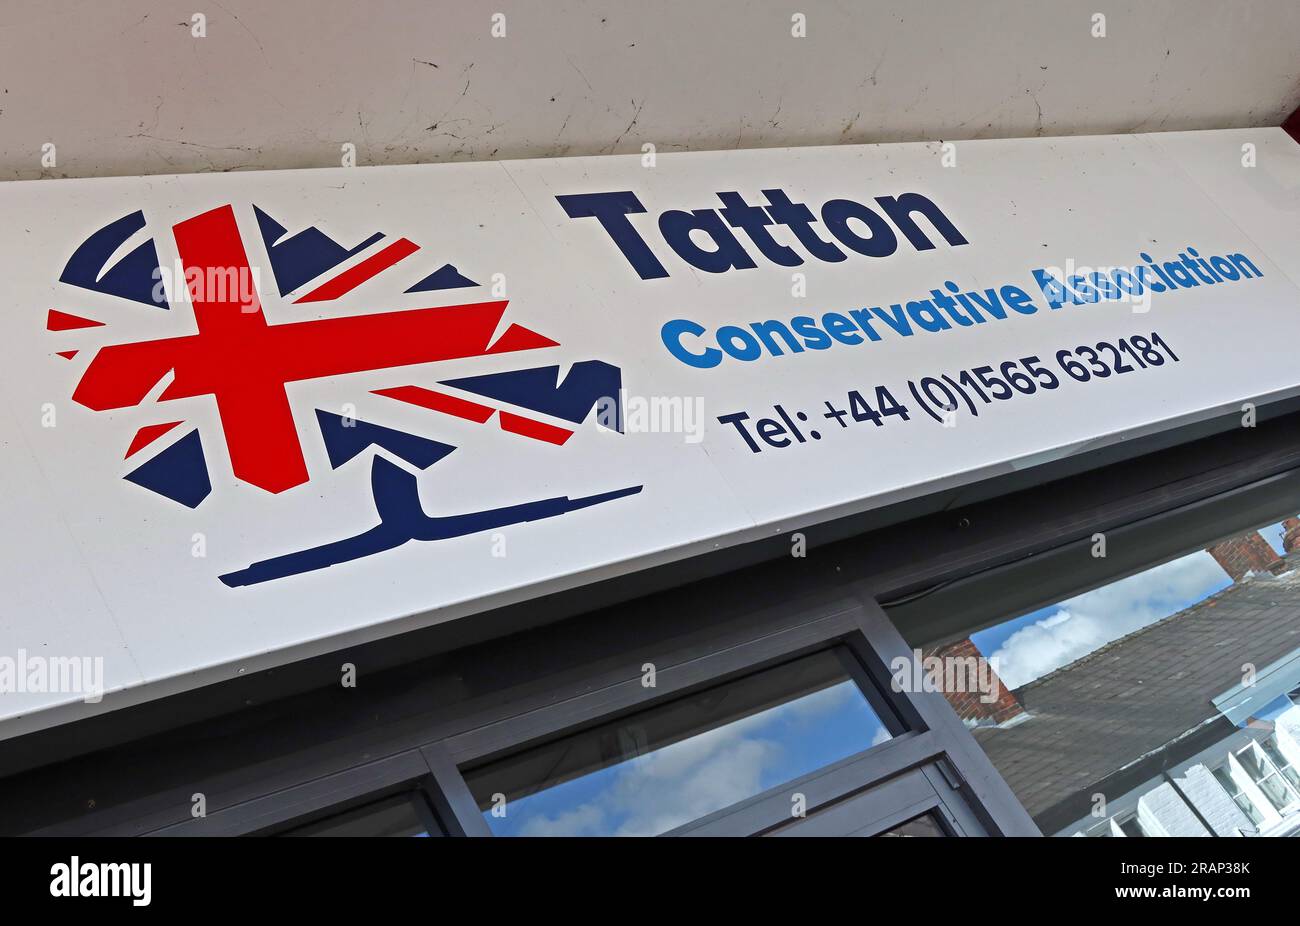 Tatton Conservative Association, 21 Canute place, Knutsford, Cheshire, Angleterre, ROYAUME-UNI, WA16 6BQ Banque D'Images